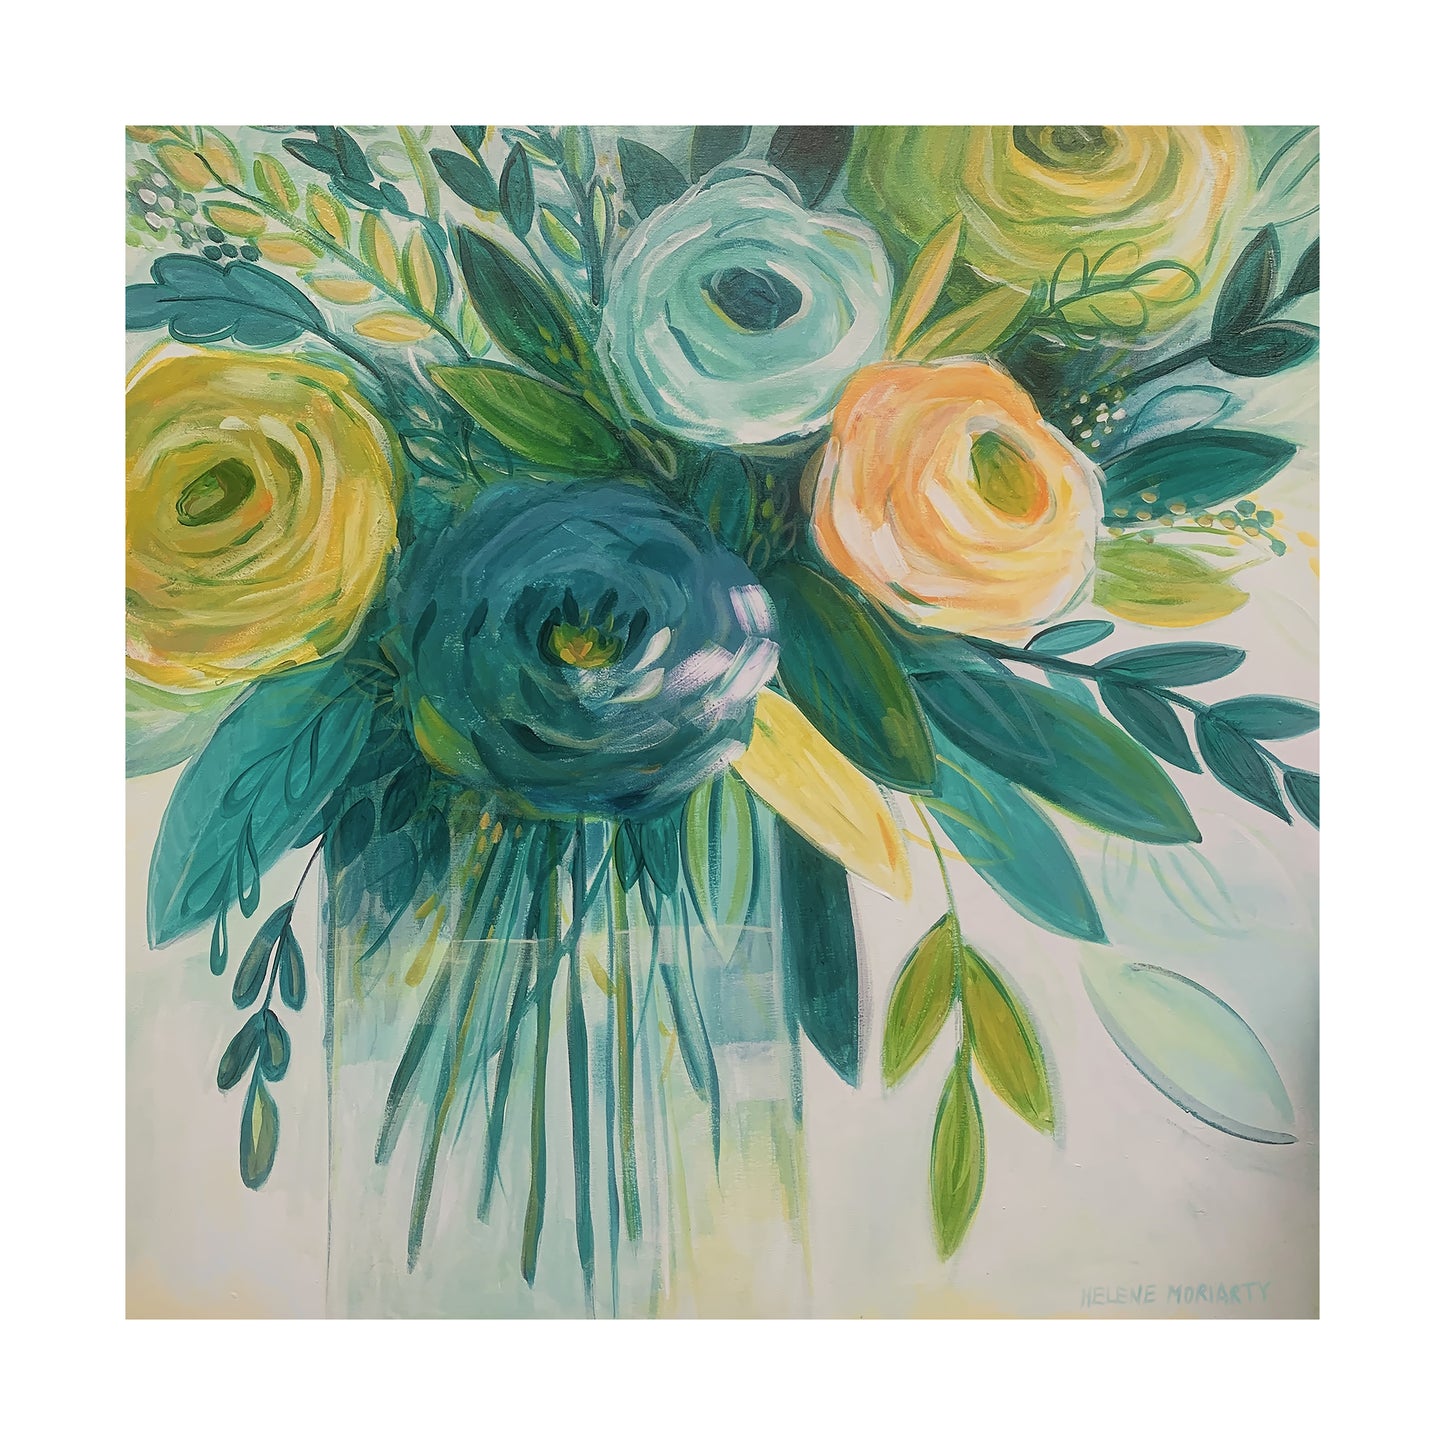 'Teal Bouquet': Fine Giclee Art Print from Original Acrylic Painting